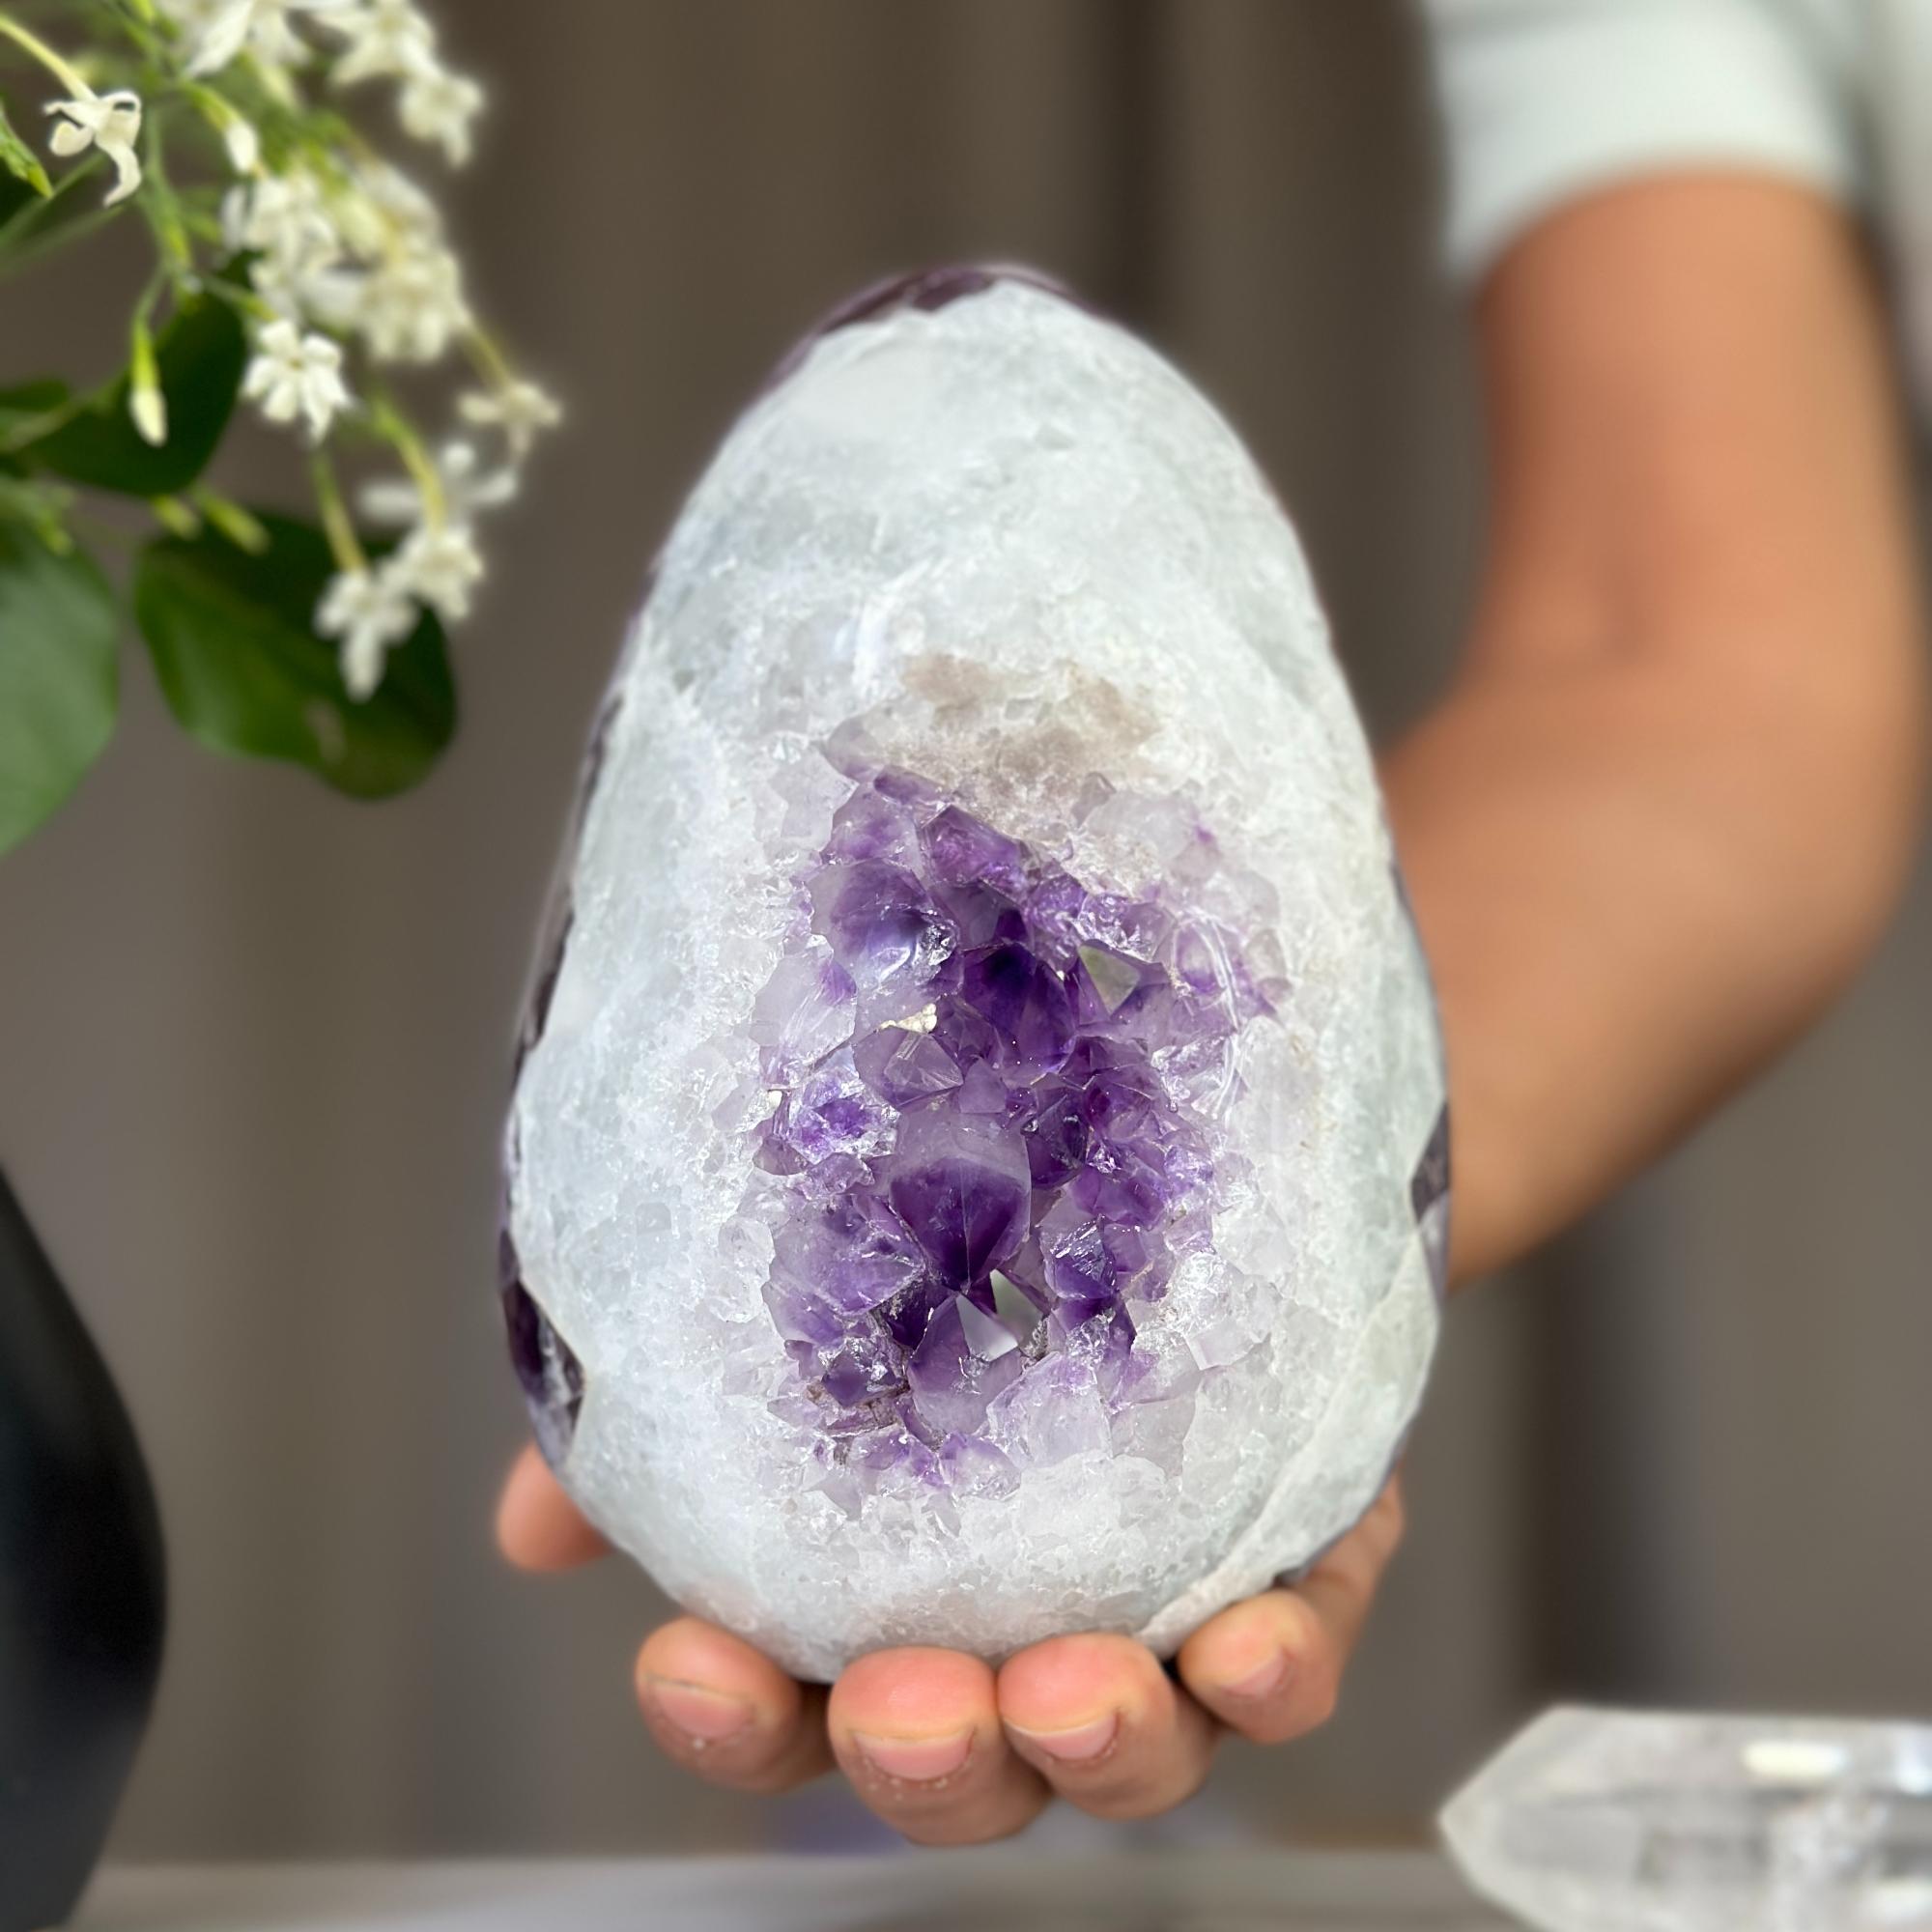 Extra Large Amethyst Geode Cave, Oval shaped Full polished stone, Stunning decor piece, Giant Crystal